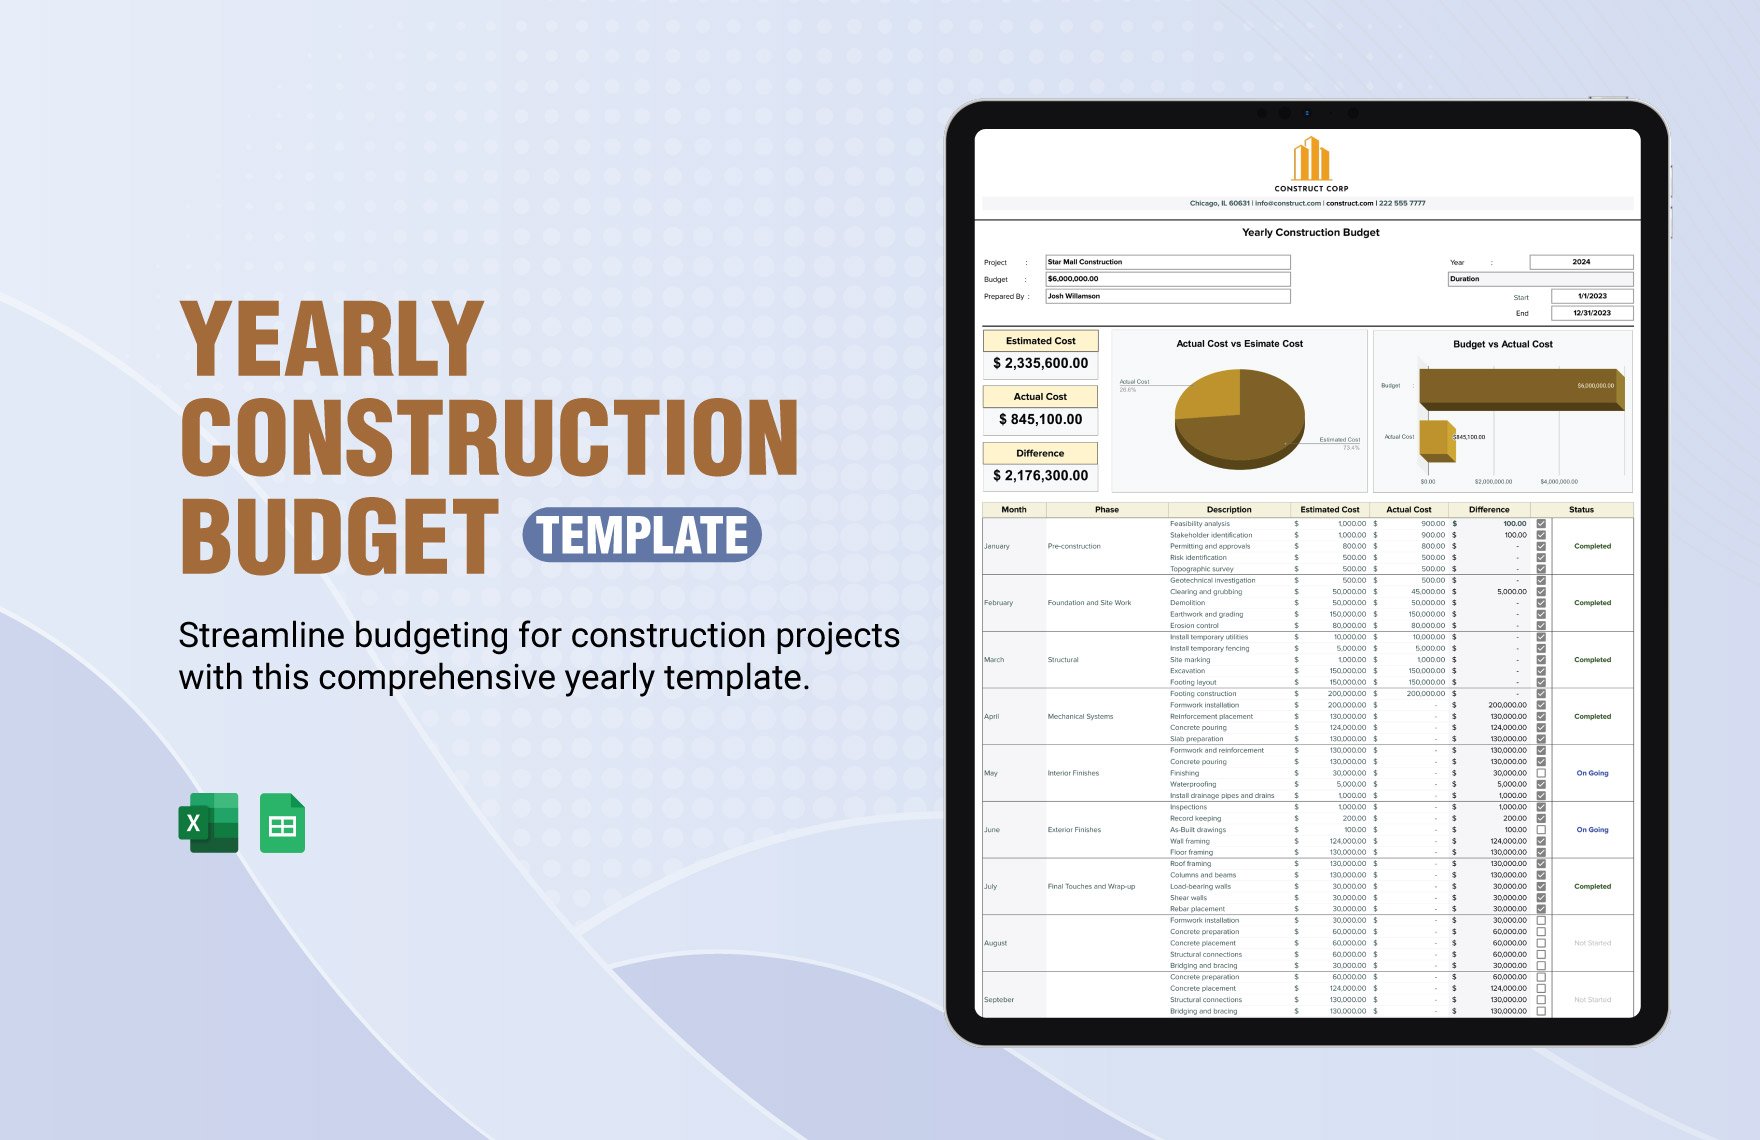 Yearly Construction Budget Template in Excel, Google Sheets